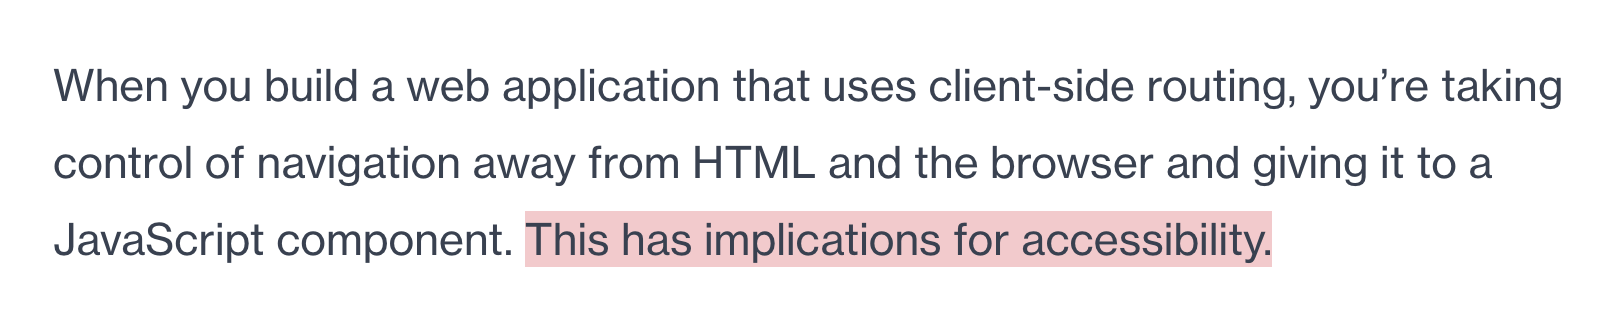 When you build a web application that uses client-side routing, you’re taking control of navigation away from HTML and the browser and giving it to a JavaScript component. This has implications for accessibility.